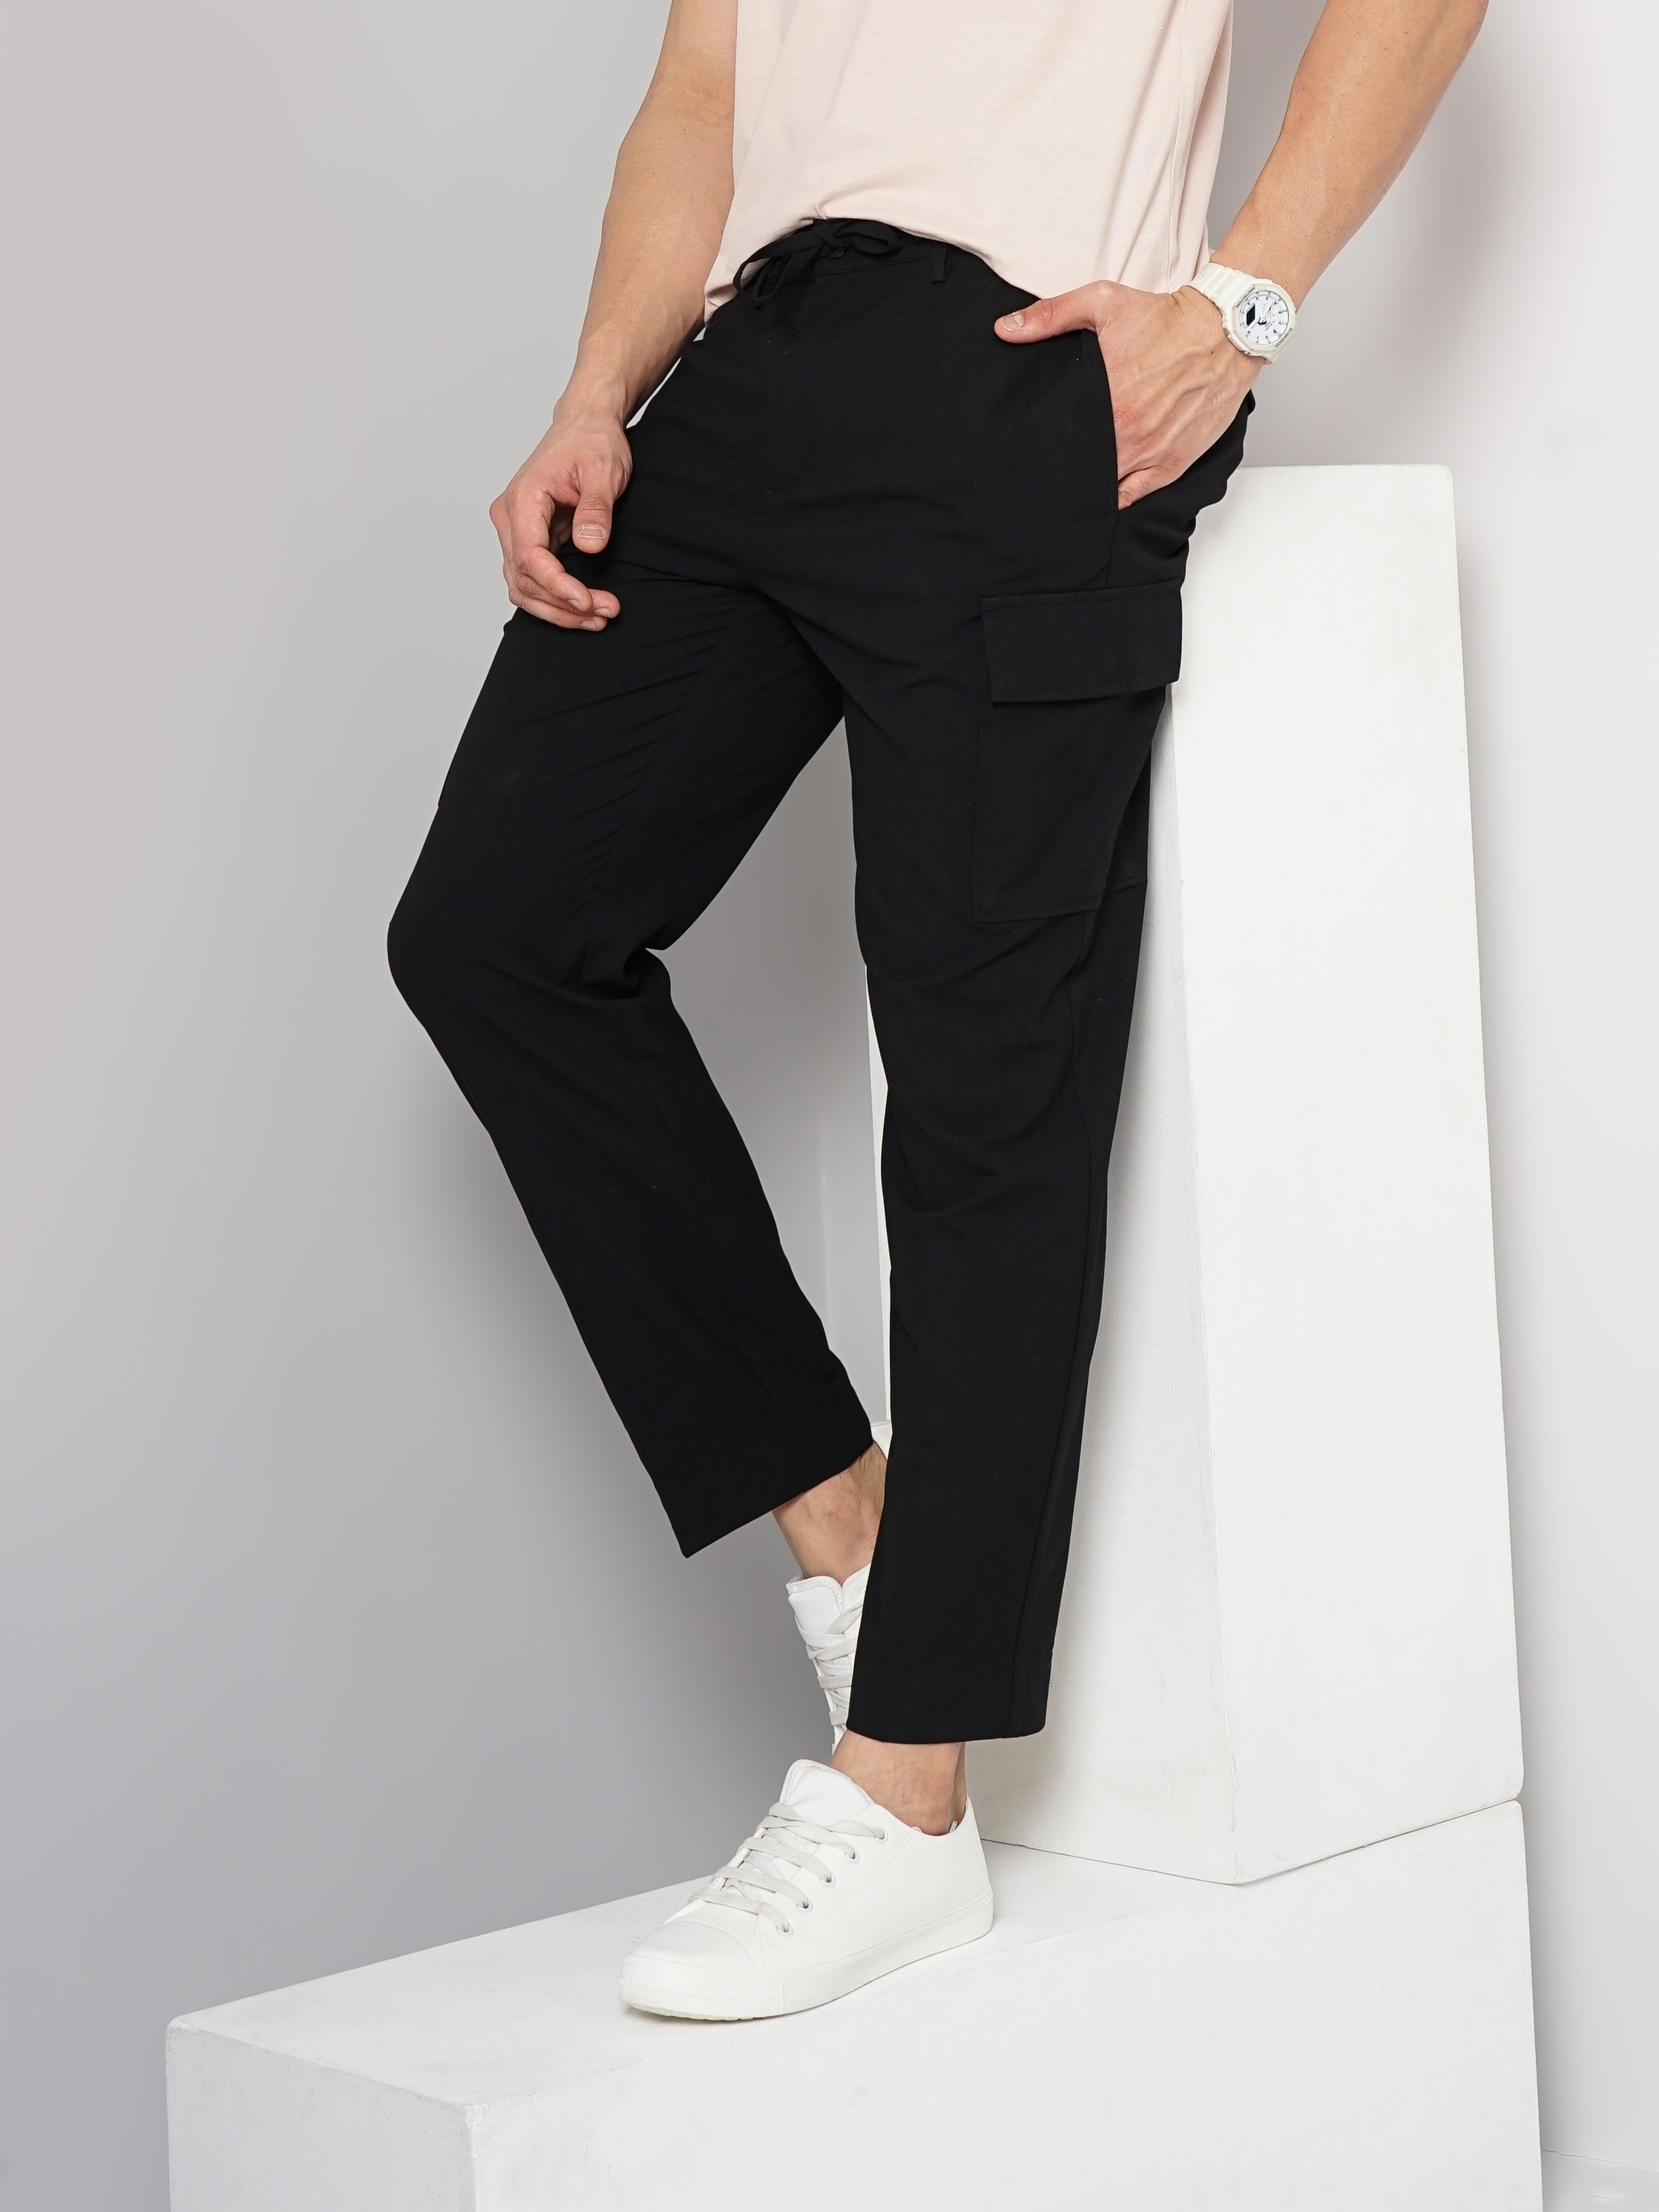 Celio Men Black Solid Straight Fit Polyester Cargo Trousers